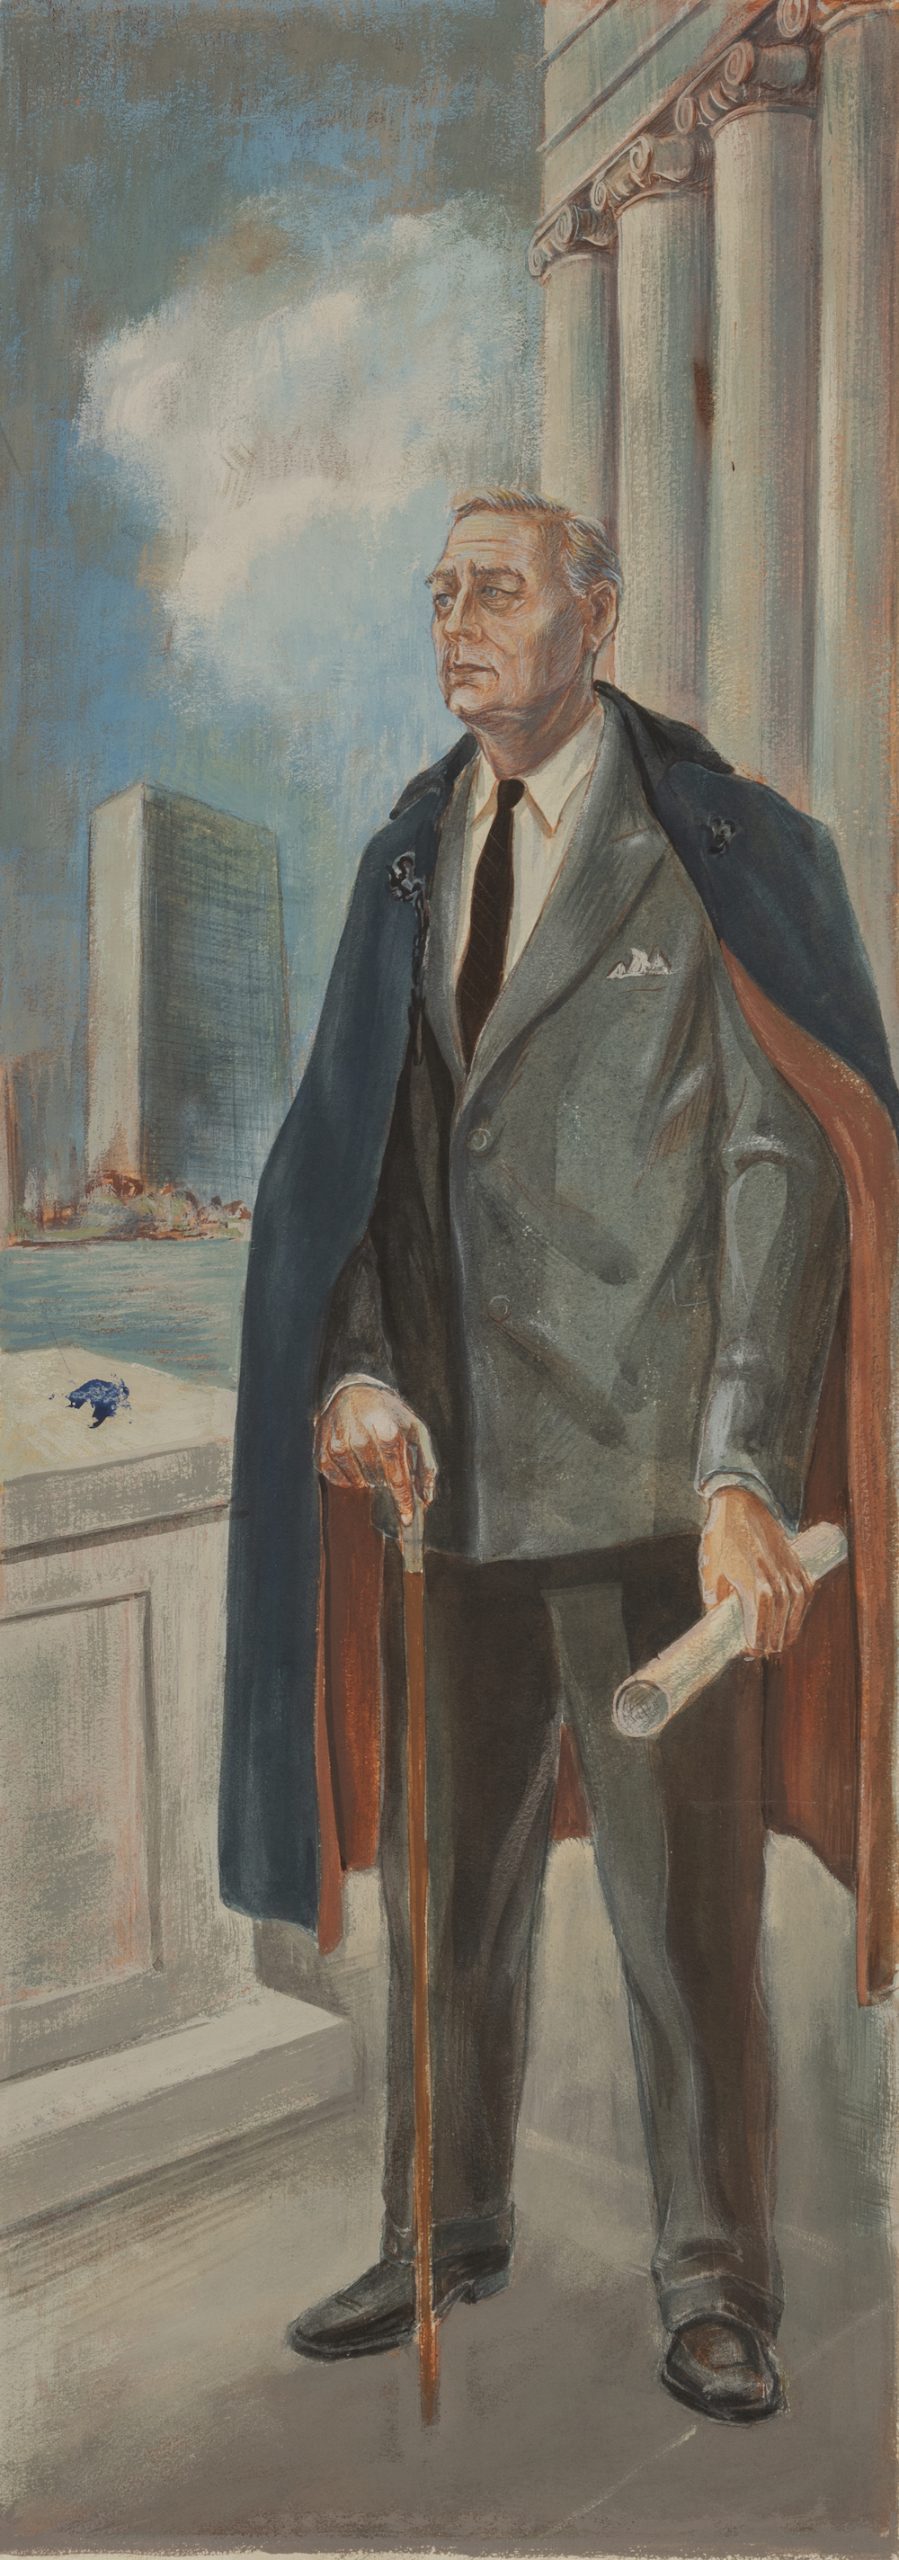 A tall narrow portrait of FDR standing in front of a large while building with pillars, a skyscraper, and a body of water.